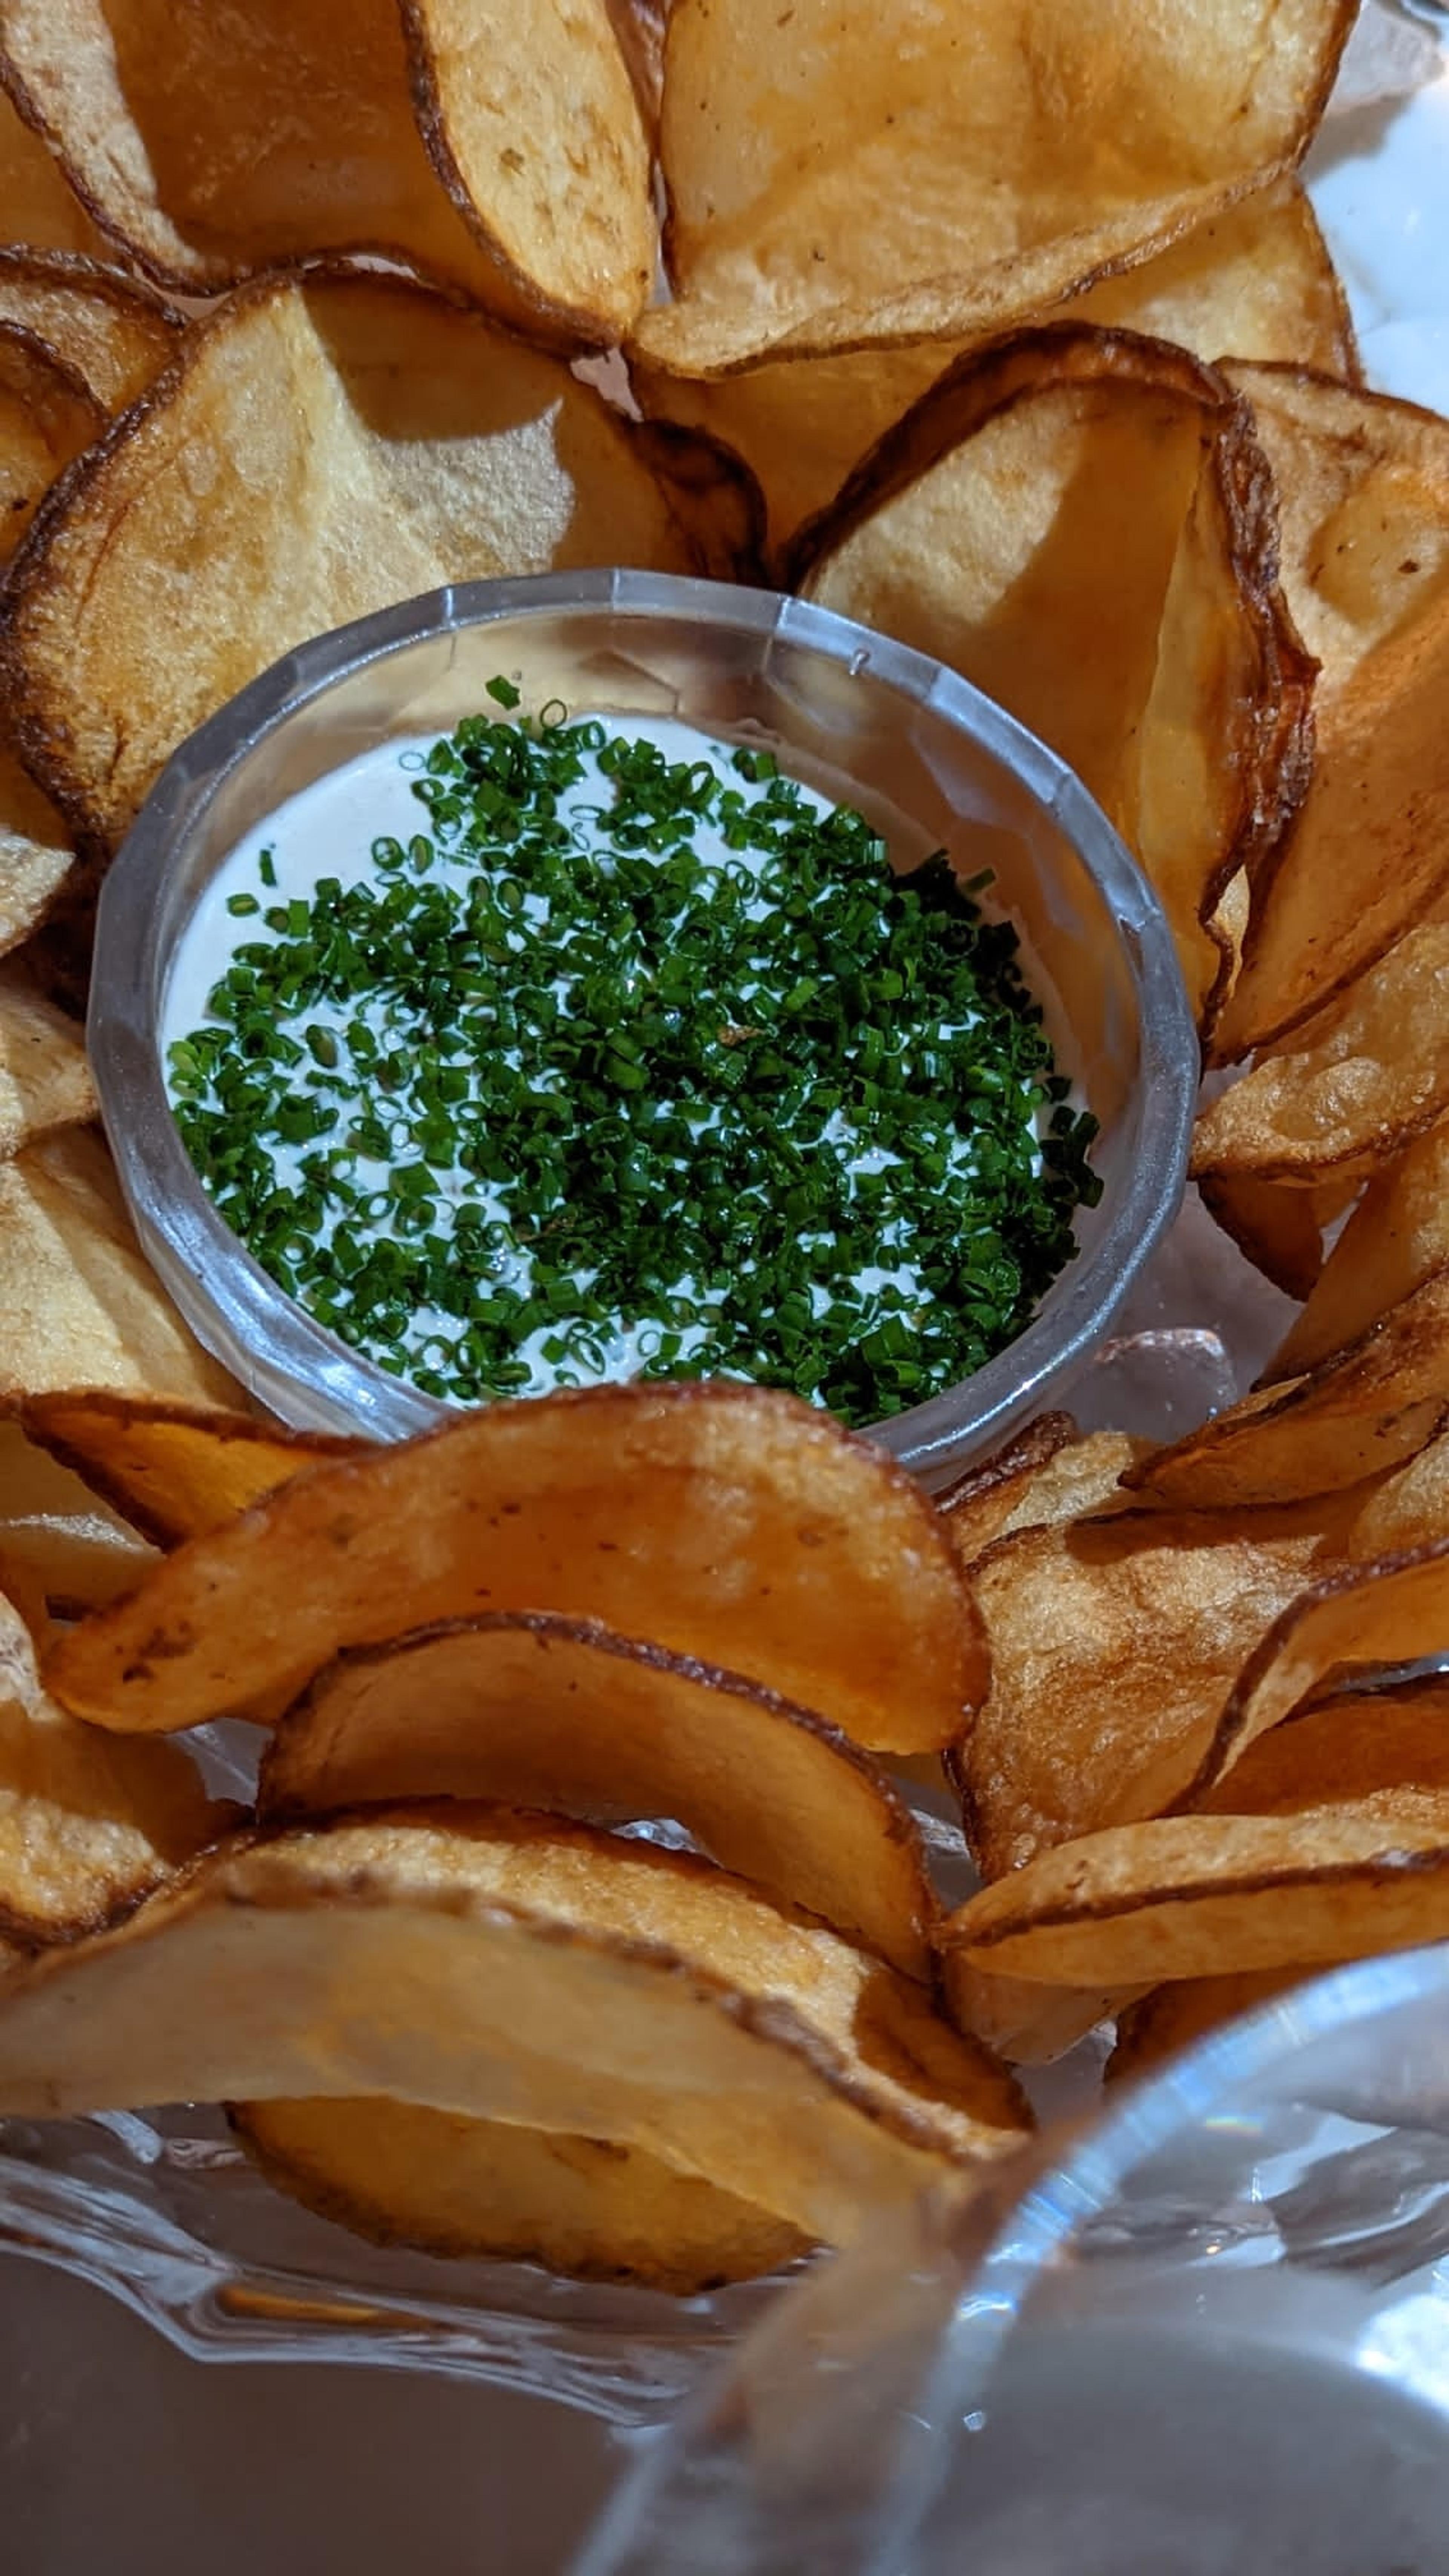 The most luxurious chips you'll ever taste